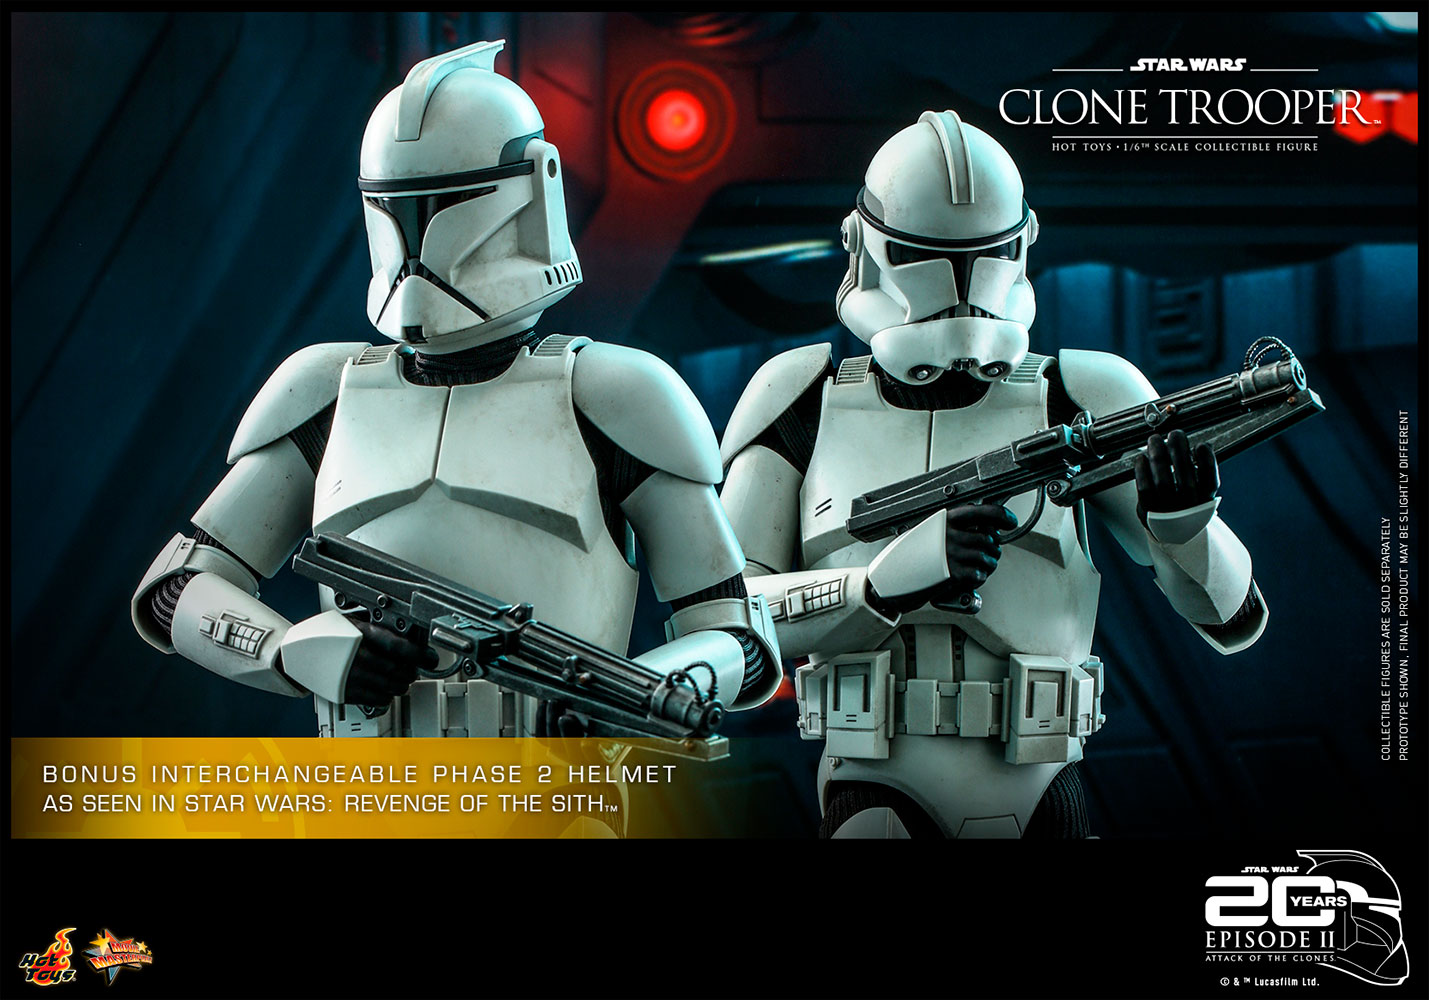 Clone Trooper Sixth Scale Figure by Hot Toys Movie Masterpiece Series - Star Wars Episode II: Attack of the Clones